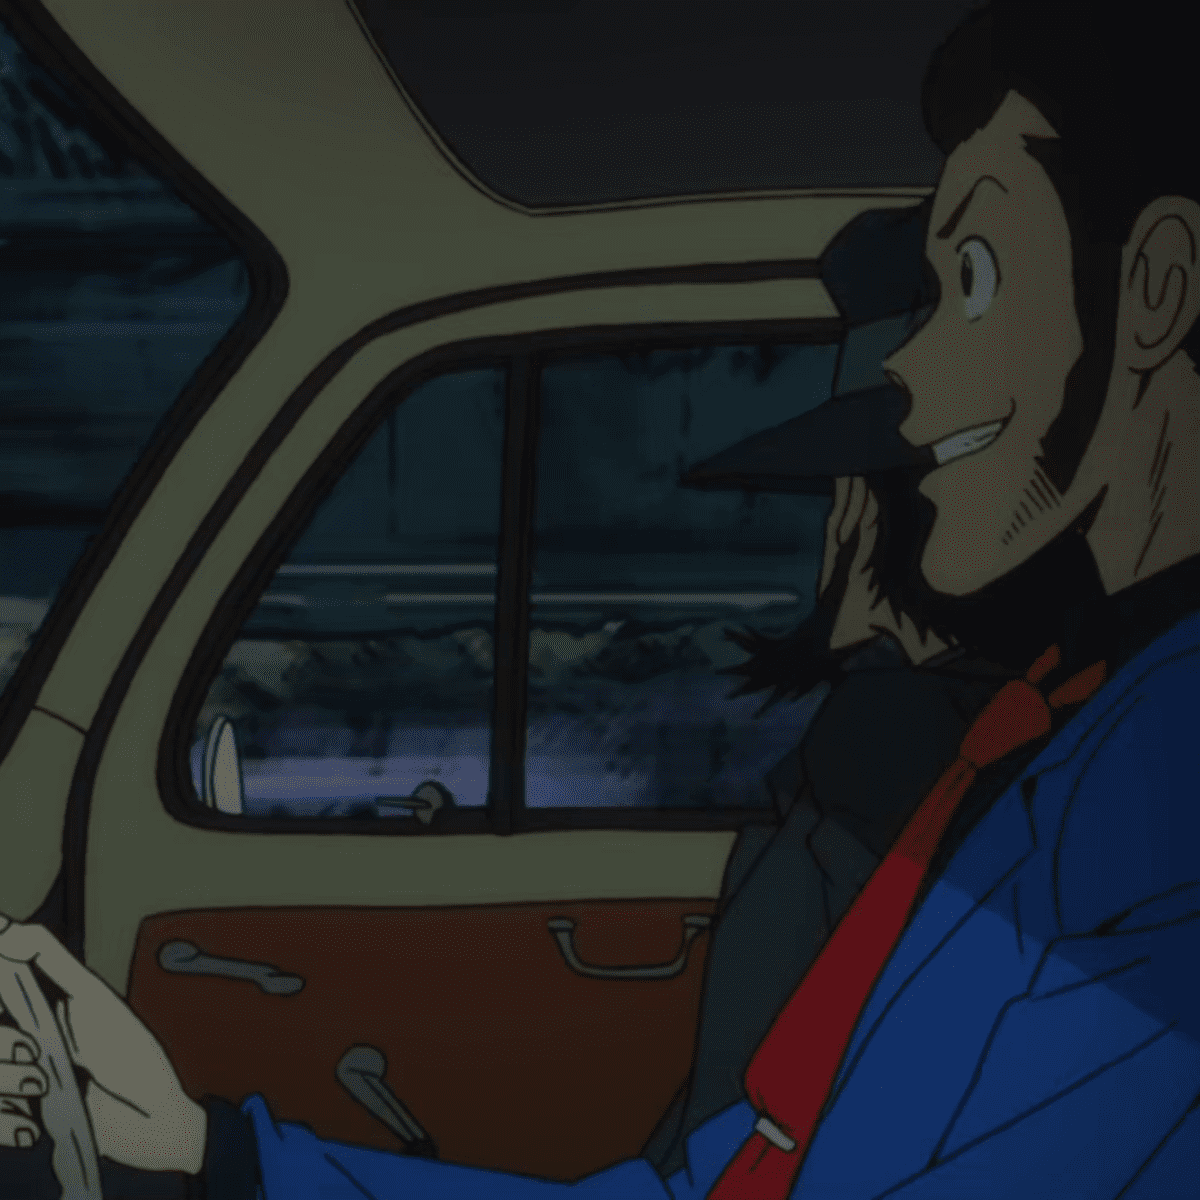 How to watch Lupin the Third anime: Complete watch order, explained